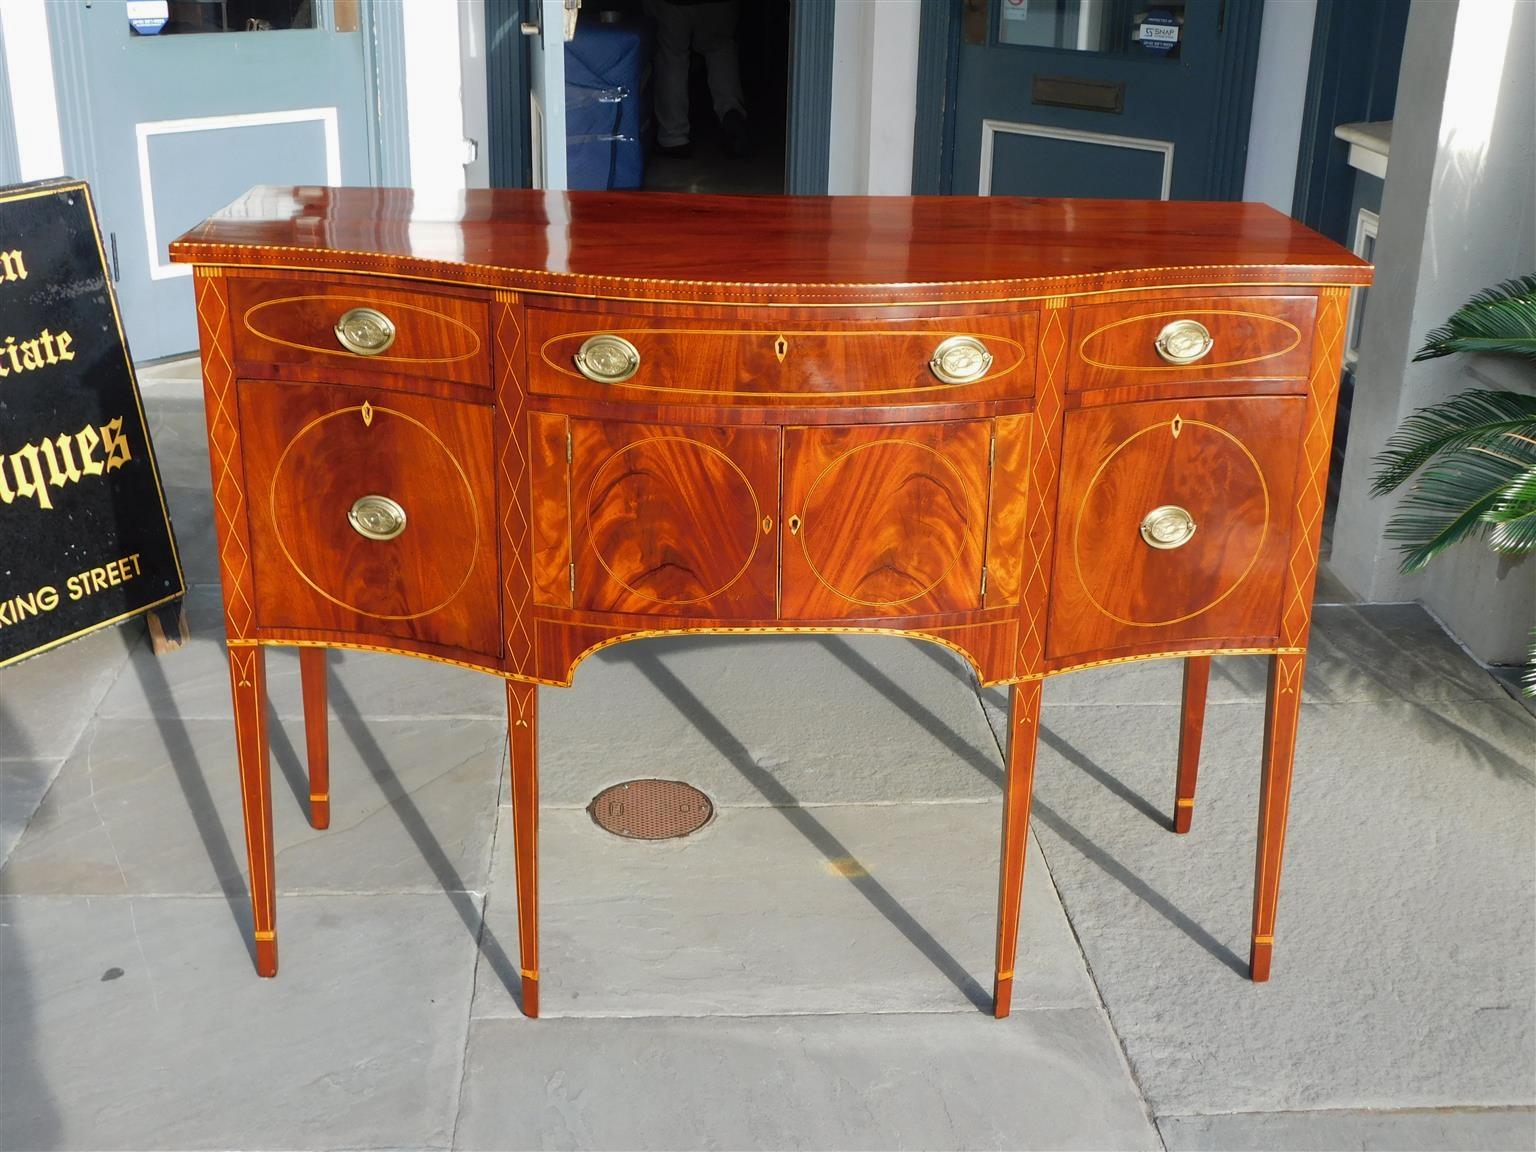 American Hepplewhite Mahogany serpentine sideboard with flanking oval satinwood string inlays, checkered inlays, period eagle oval brasses, and resting on the original satinwood string inlaid cuffed legs. William Whitehead, New York. Late 18th